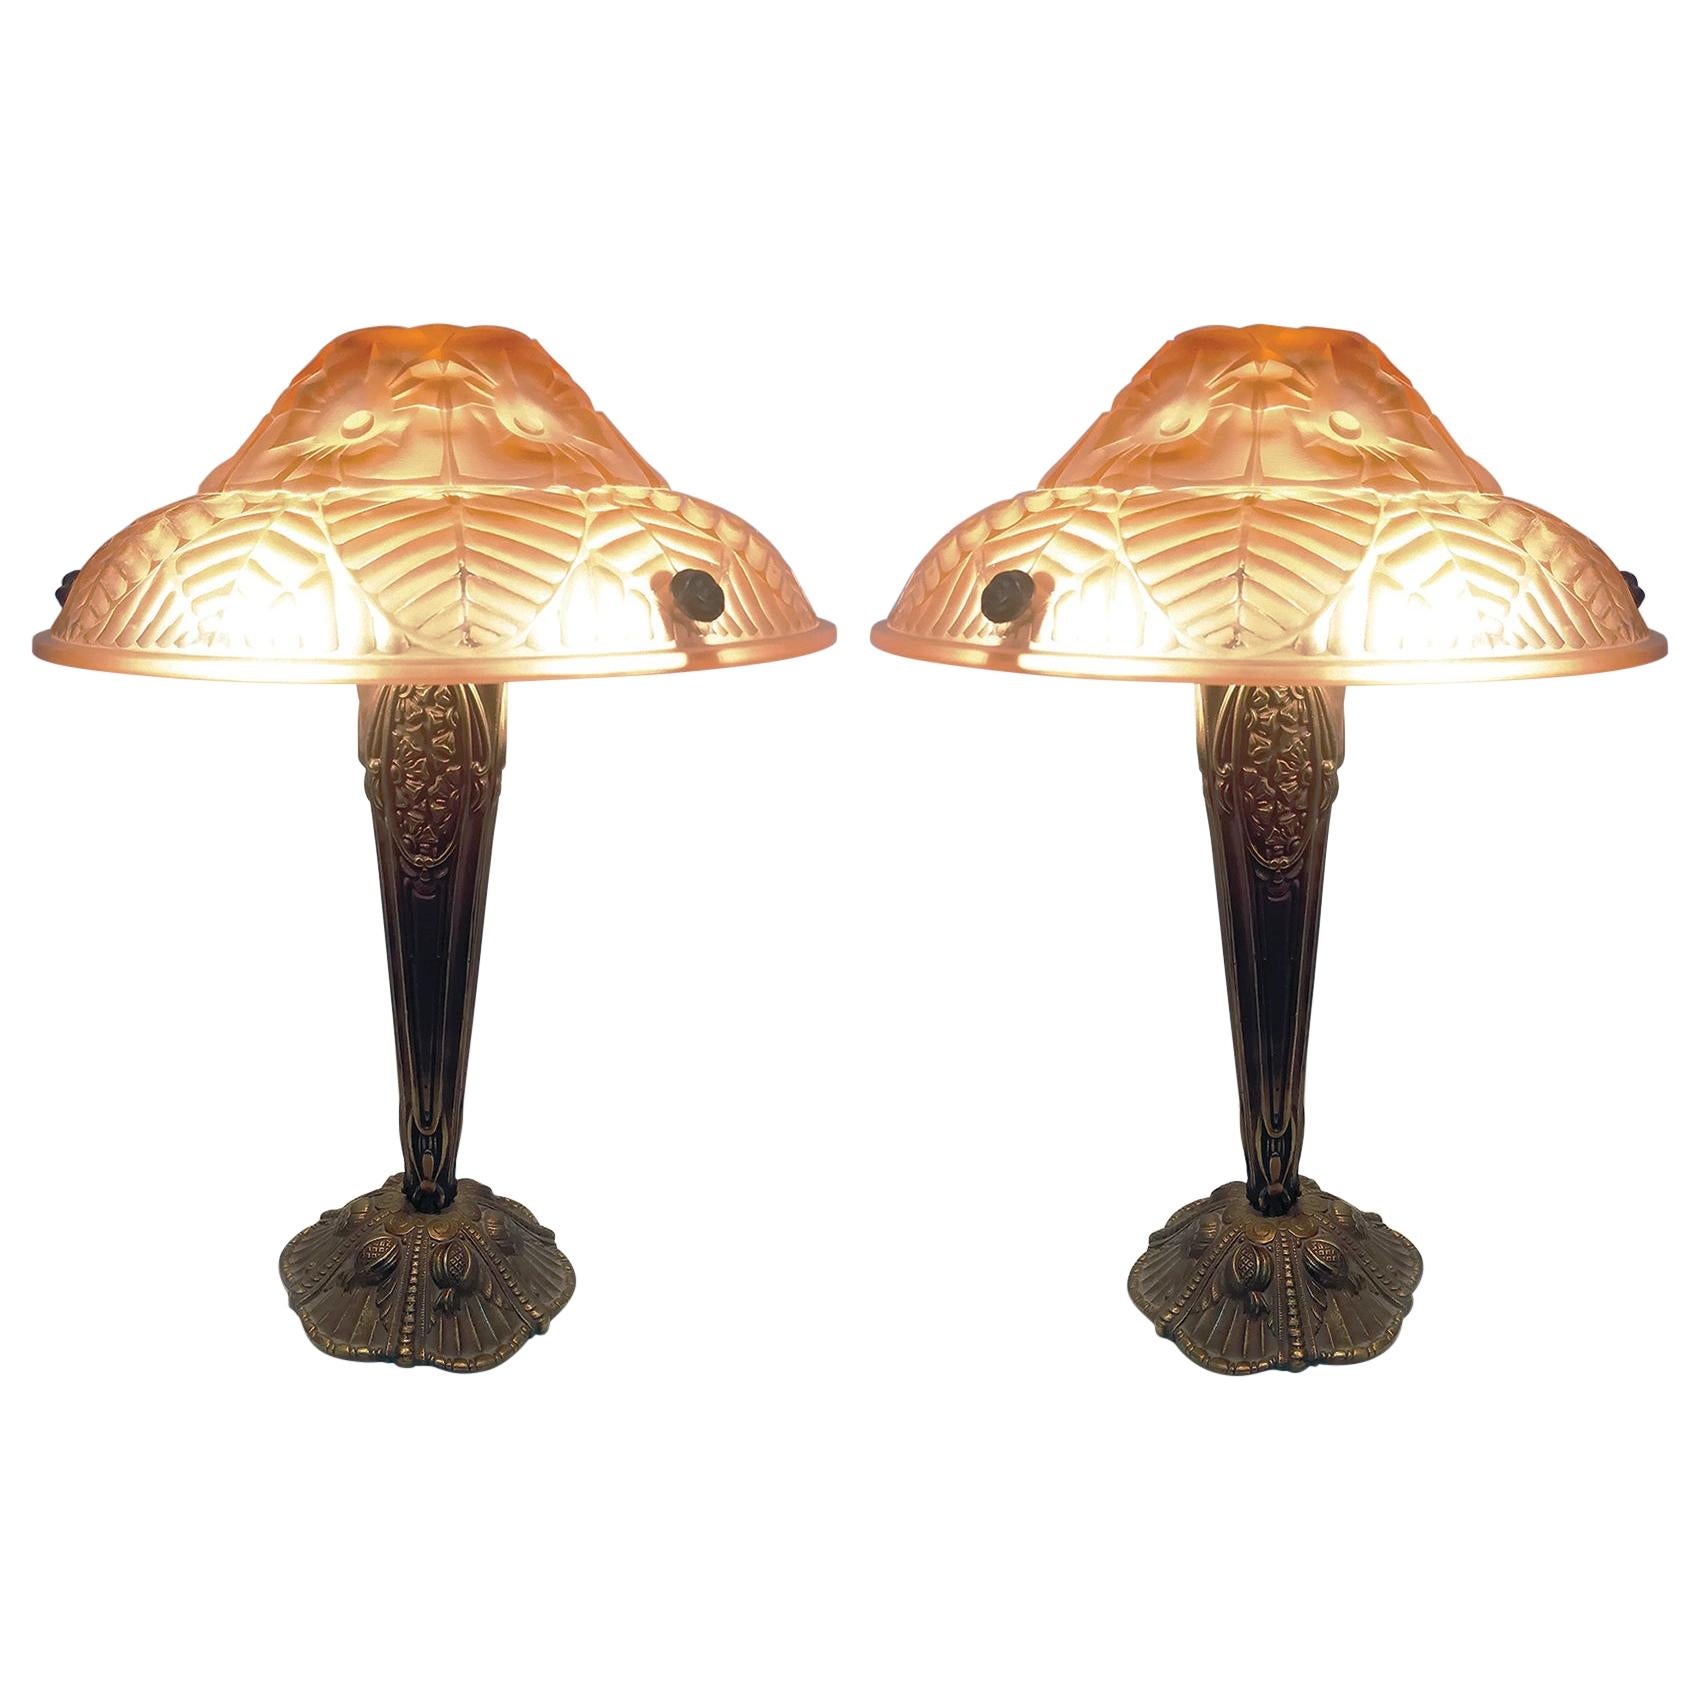 Beautiful Pair of French Art Deco Table Lamps Signed Ranc Freres, circa 1930 For Sale